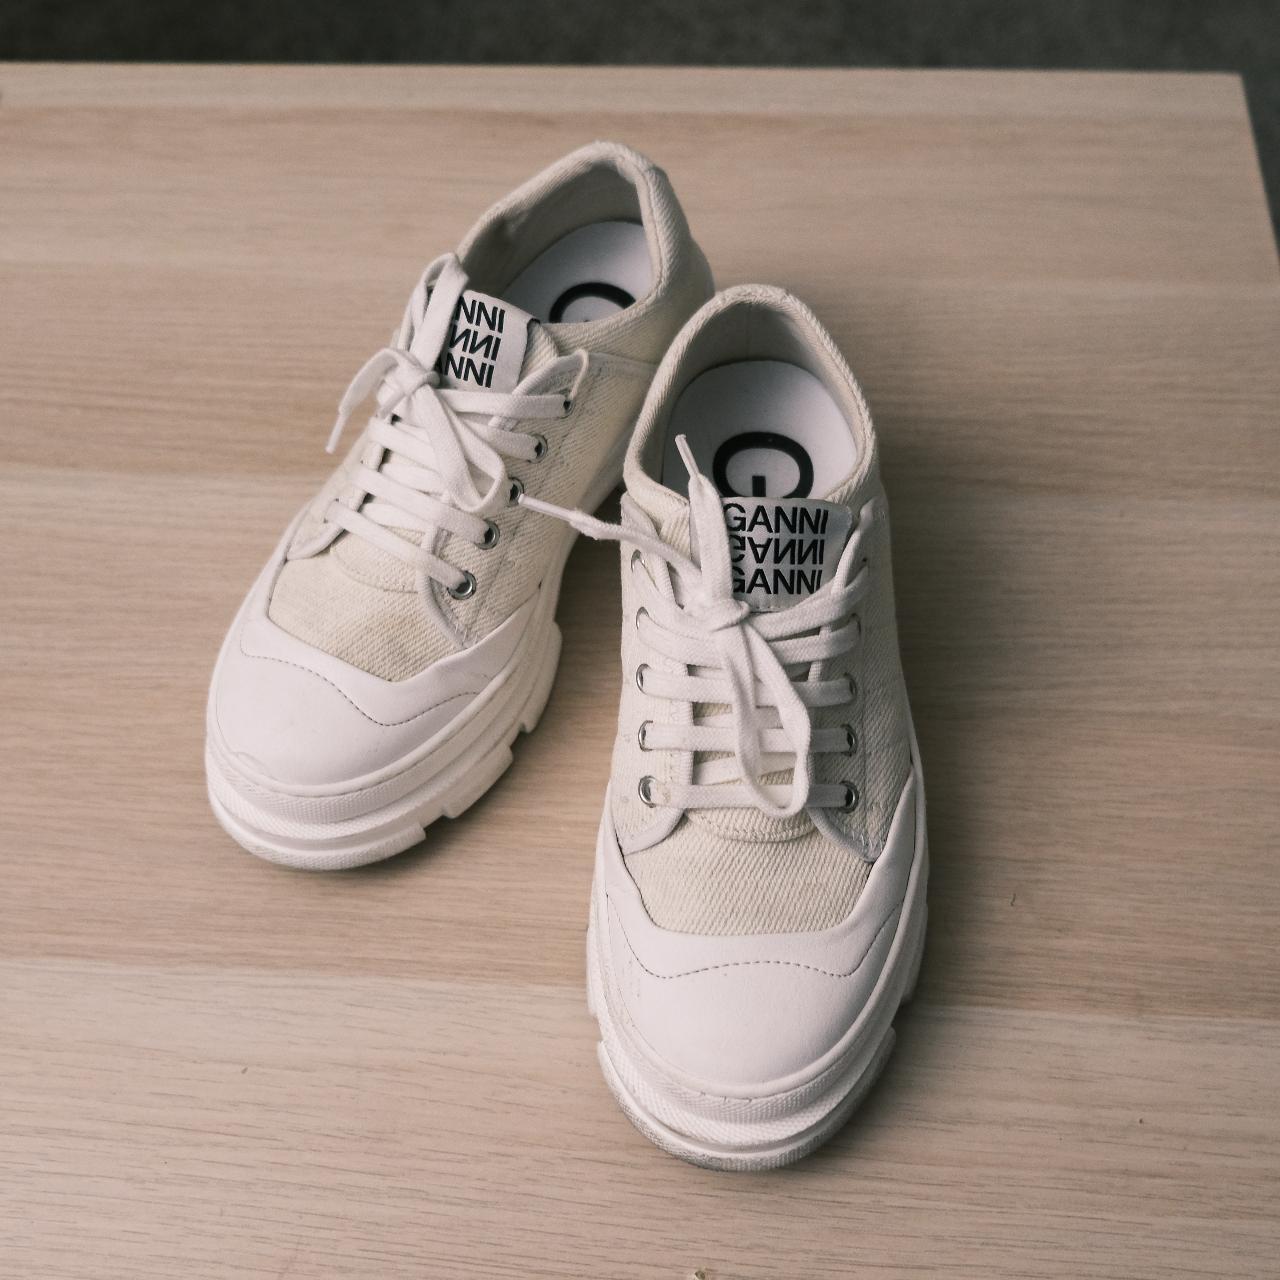 GANNI Canvas and rubber sneakers Cream/White 100%... - Depop